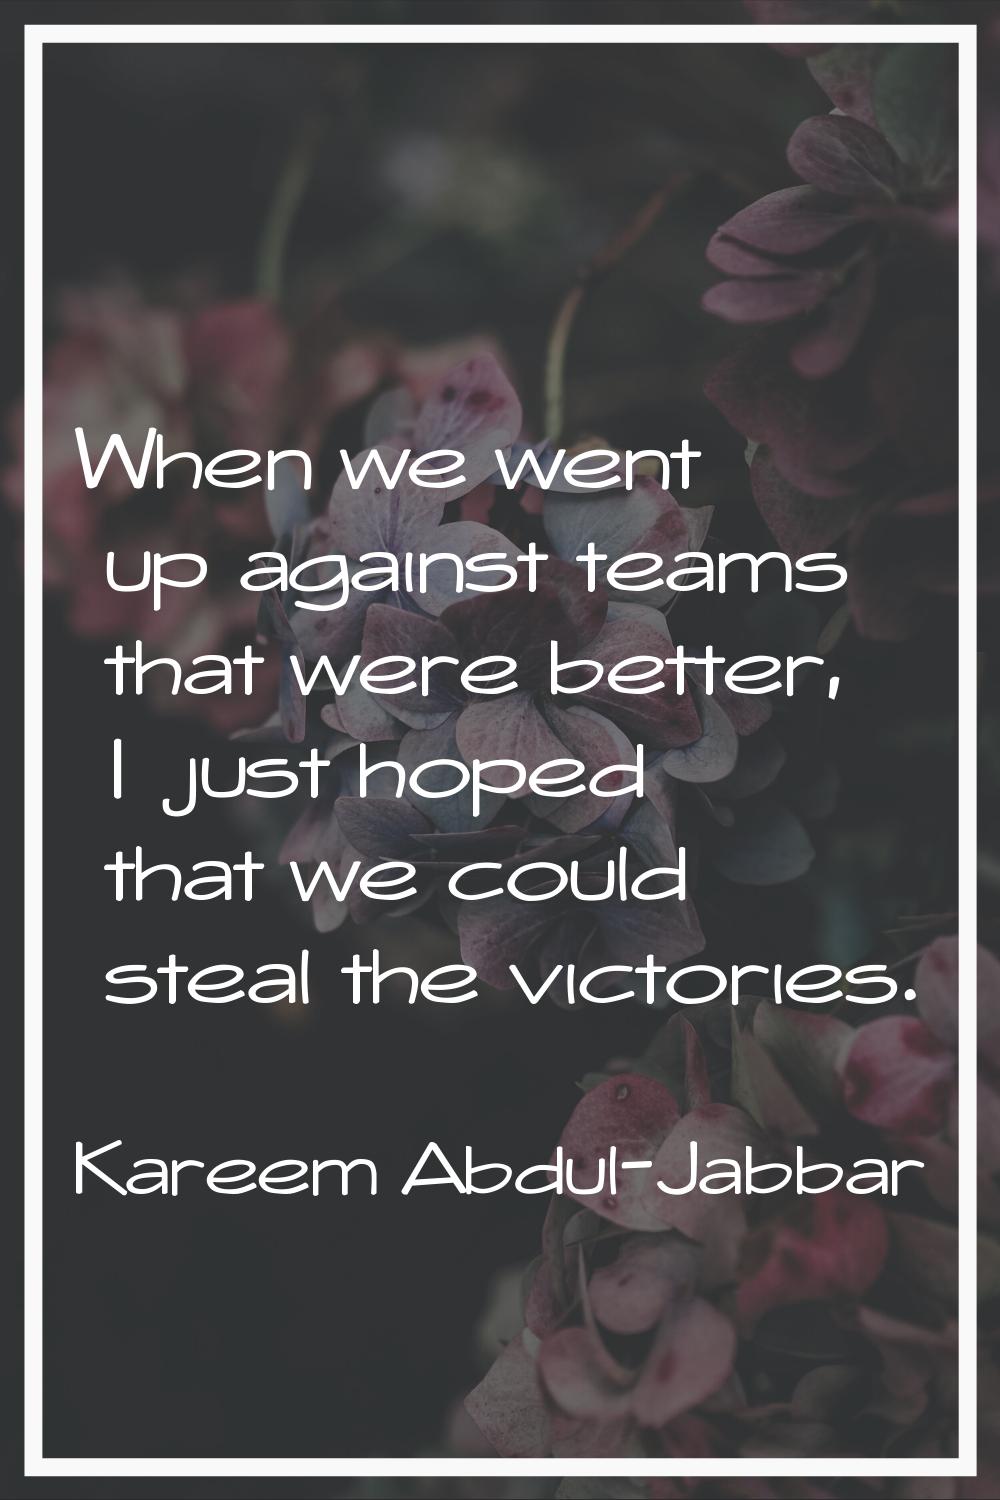 When we went up against teams that were better, I just hoped that we could steal the victories.